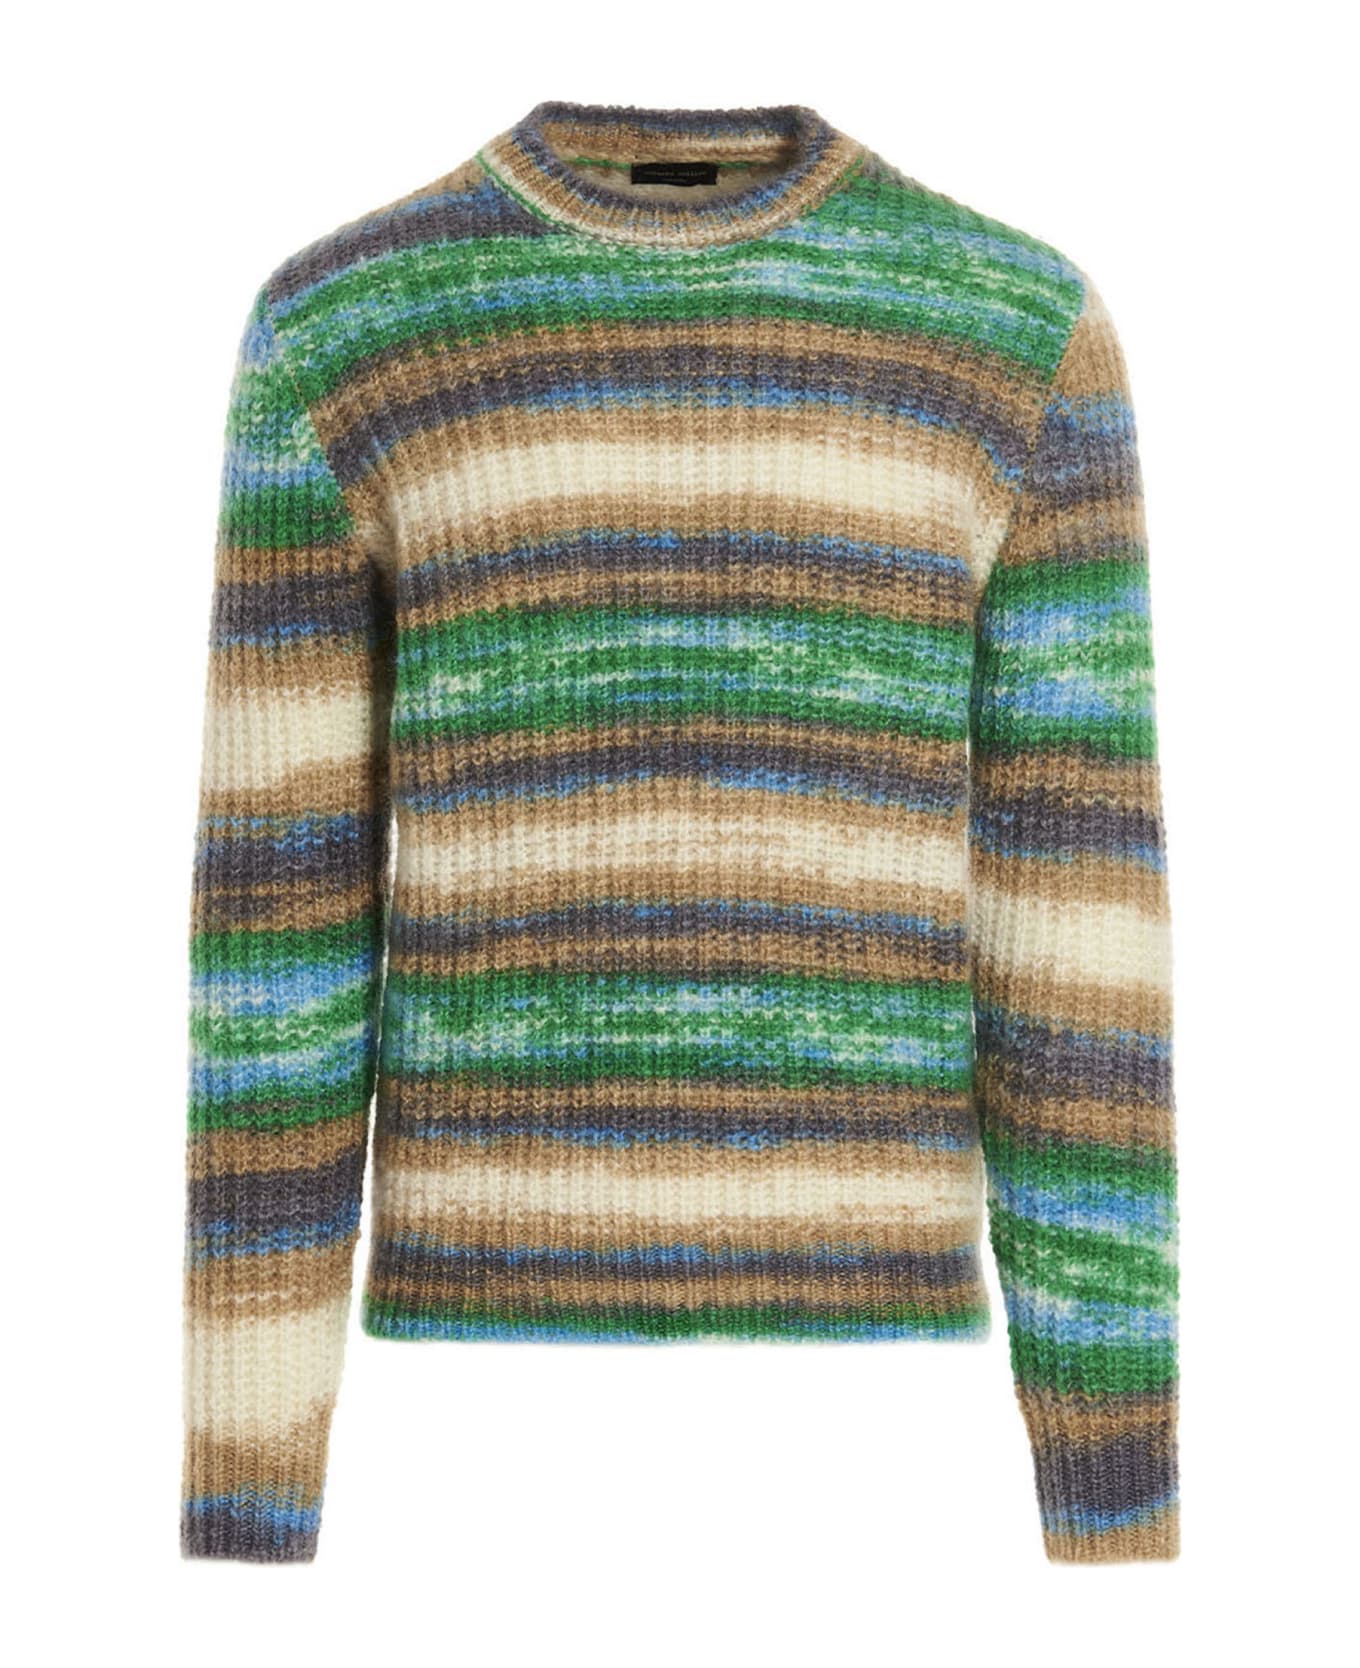 Roberto Collina Patterned Sweater - Multicolor ニットウェア